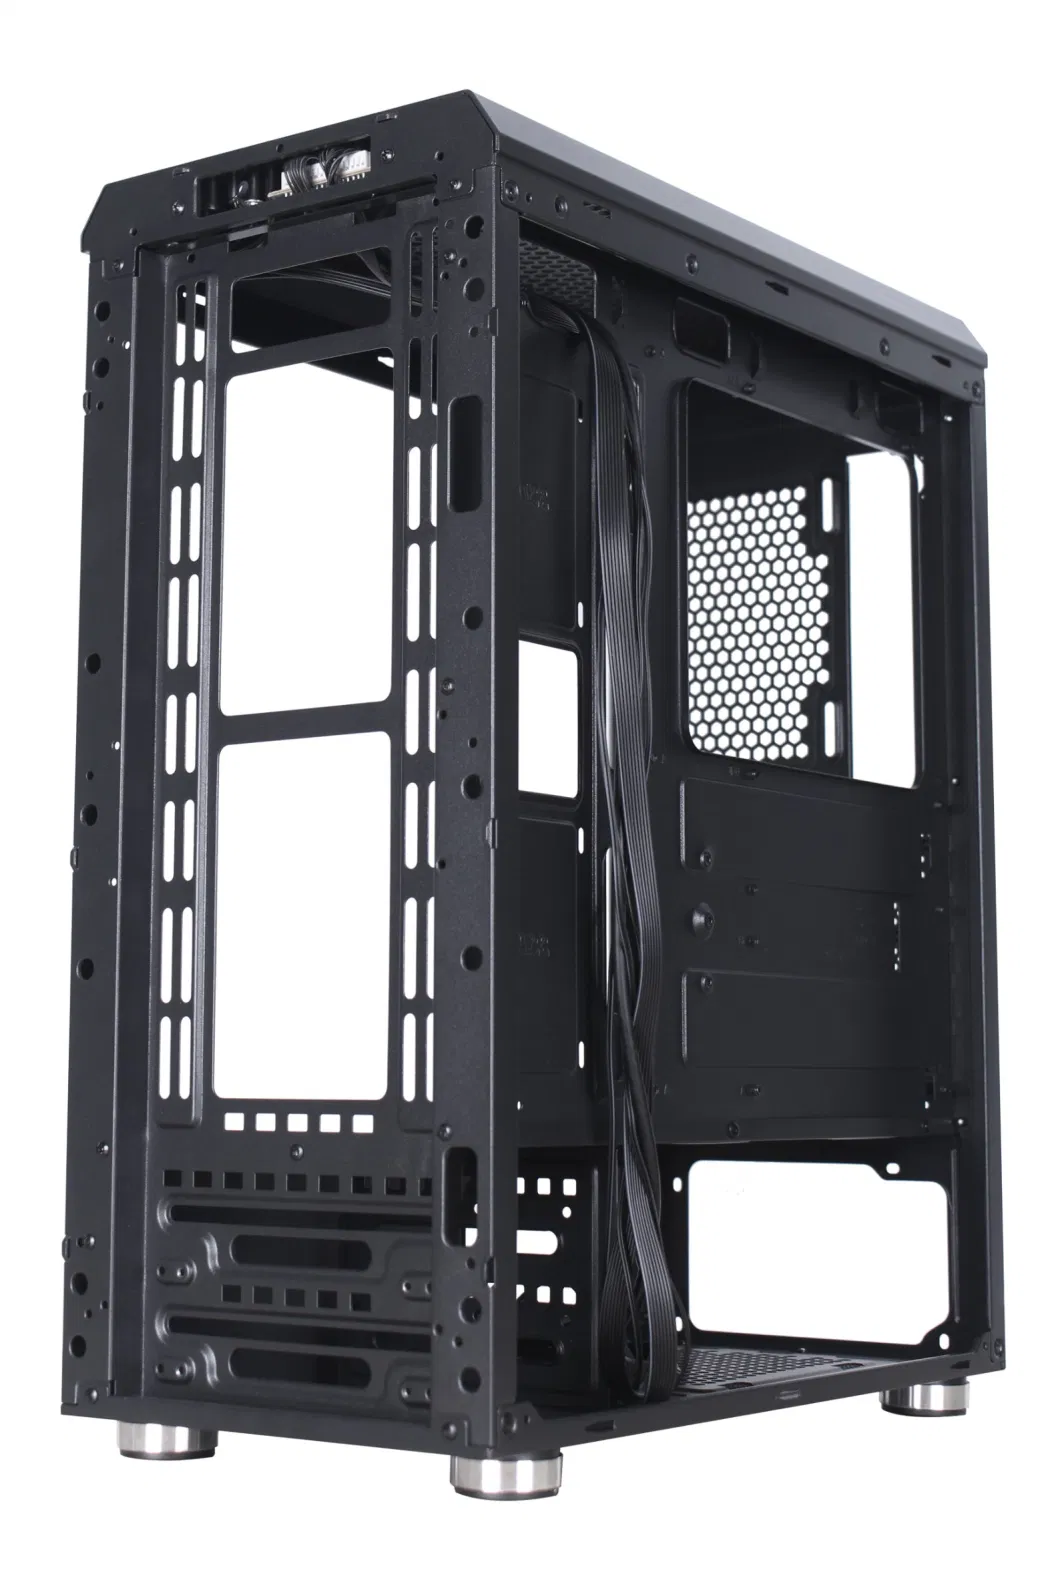 Personal USB3.0 Compuer Case Gaming MID Tower PC Case with Cool RGB LED Fans